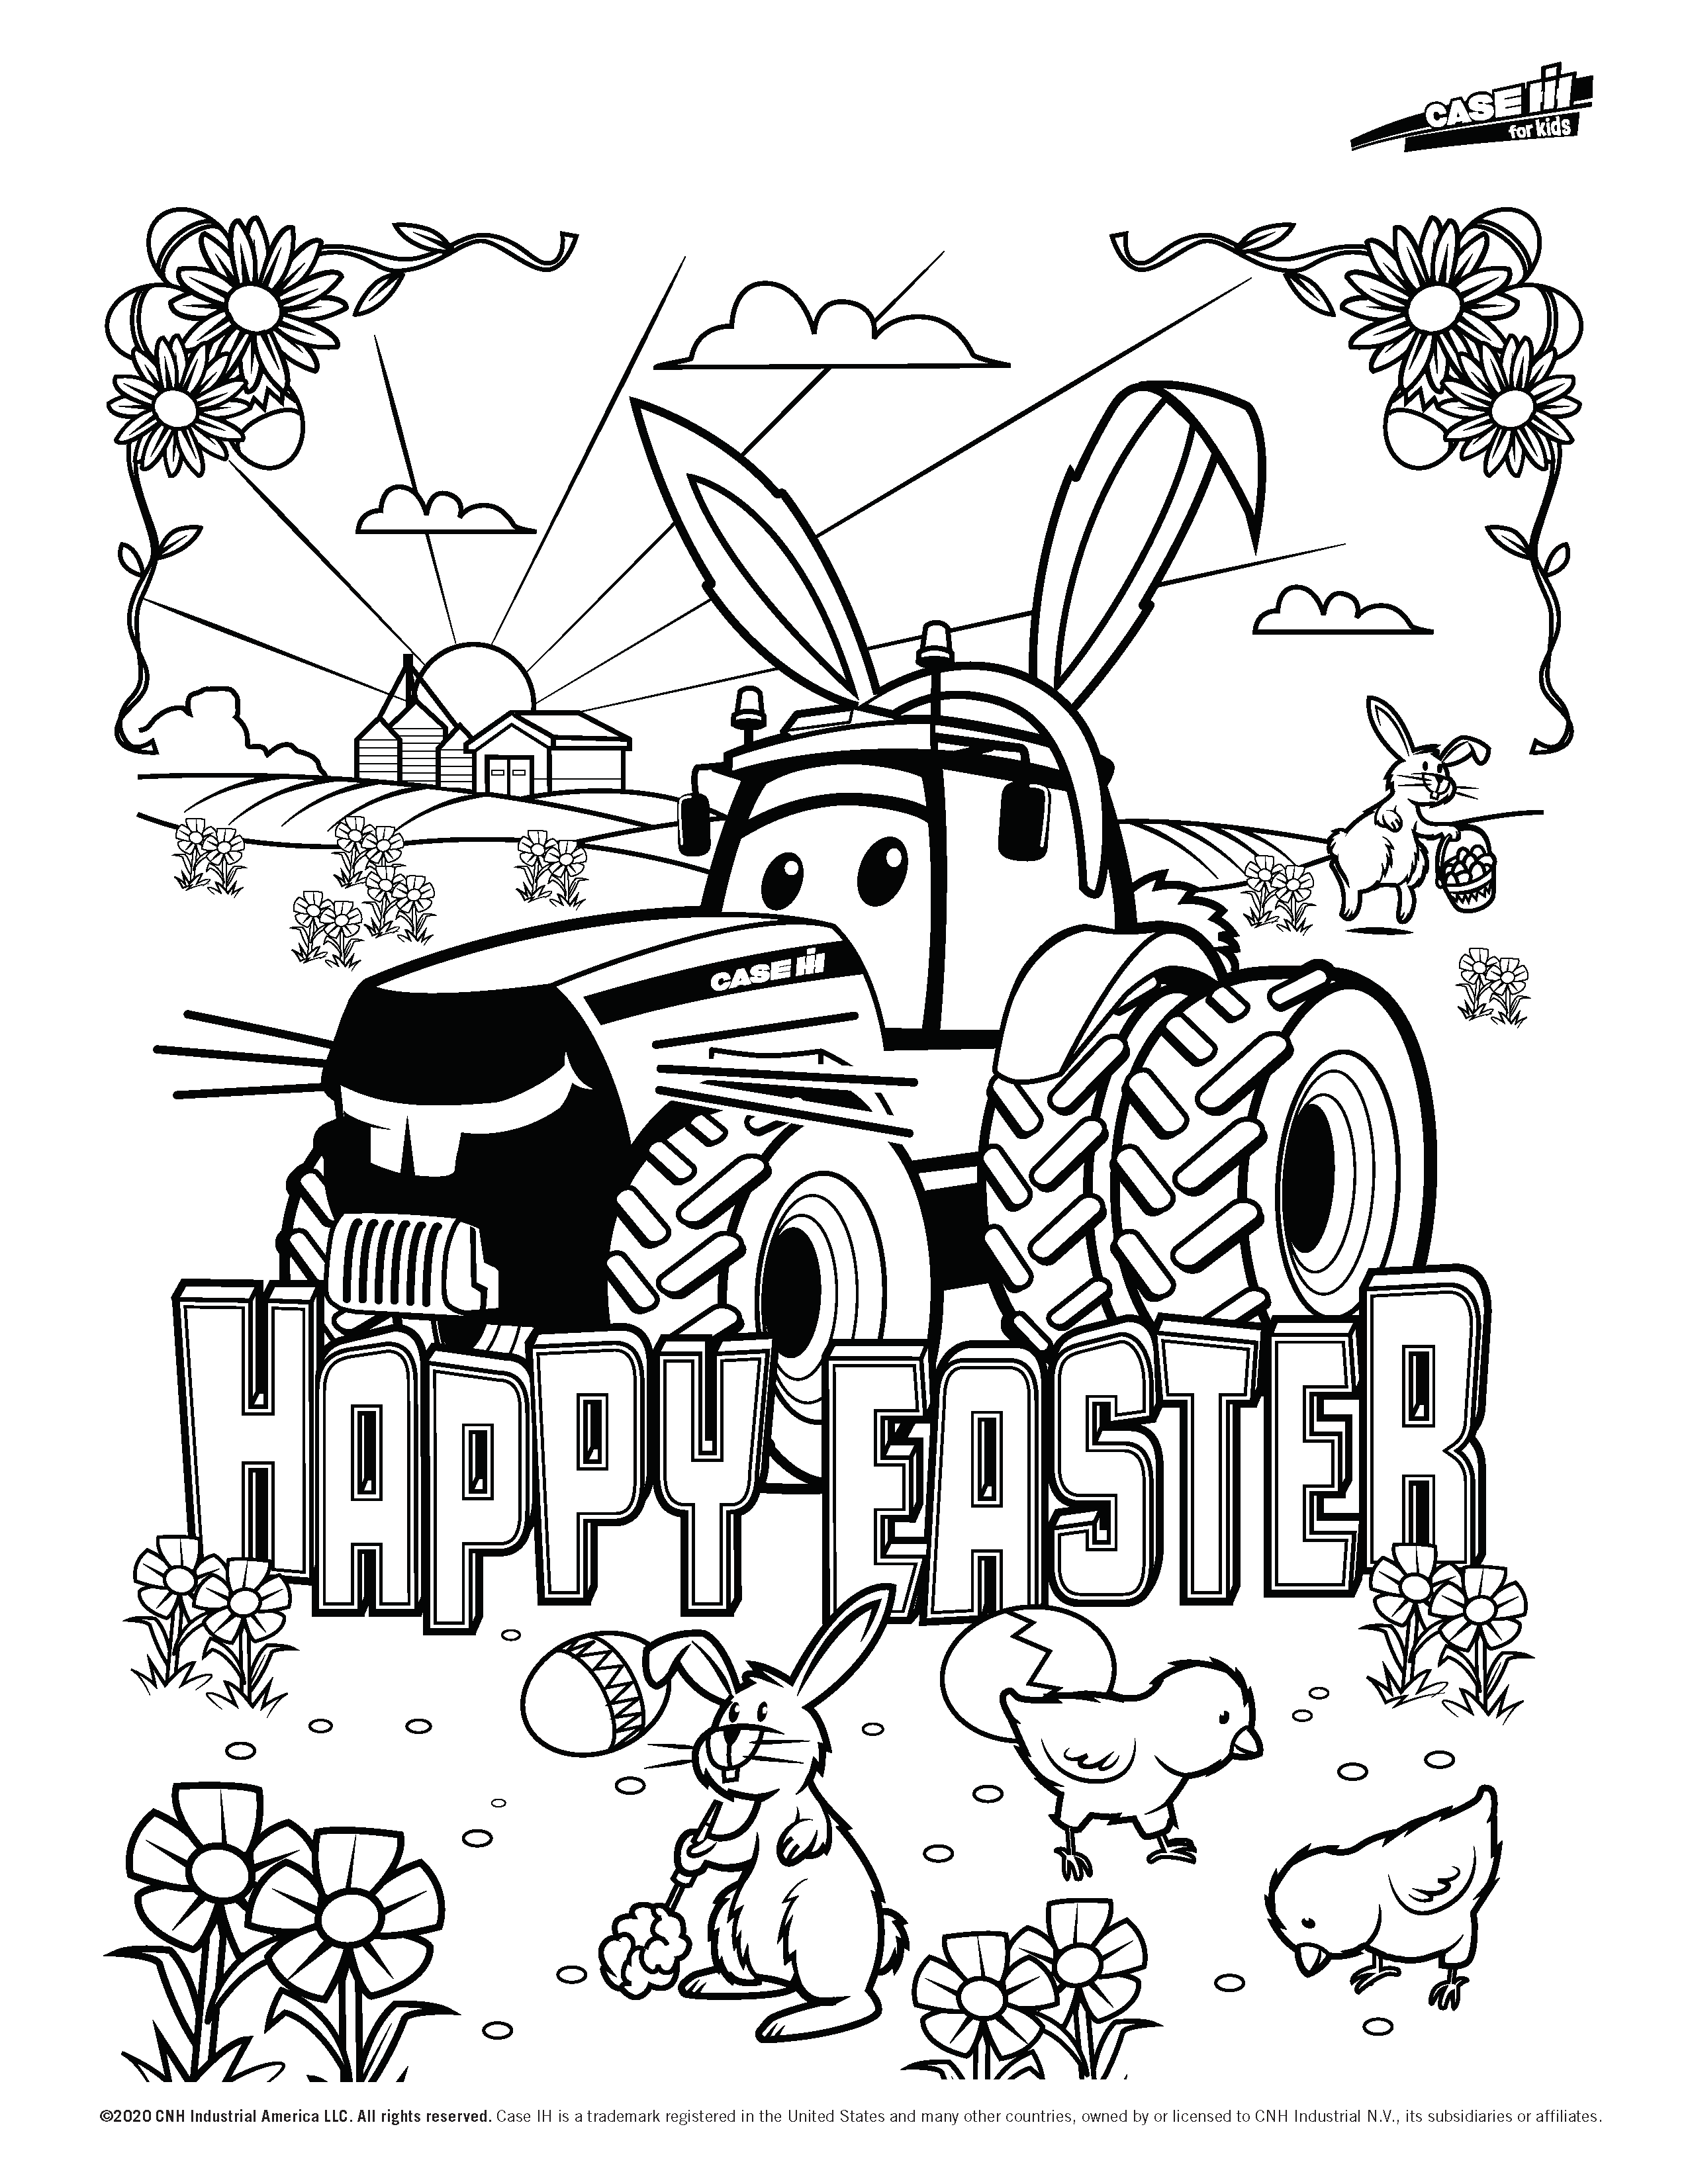 Casey and Friends_Easter_03.png